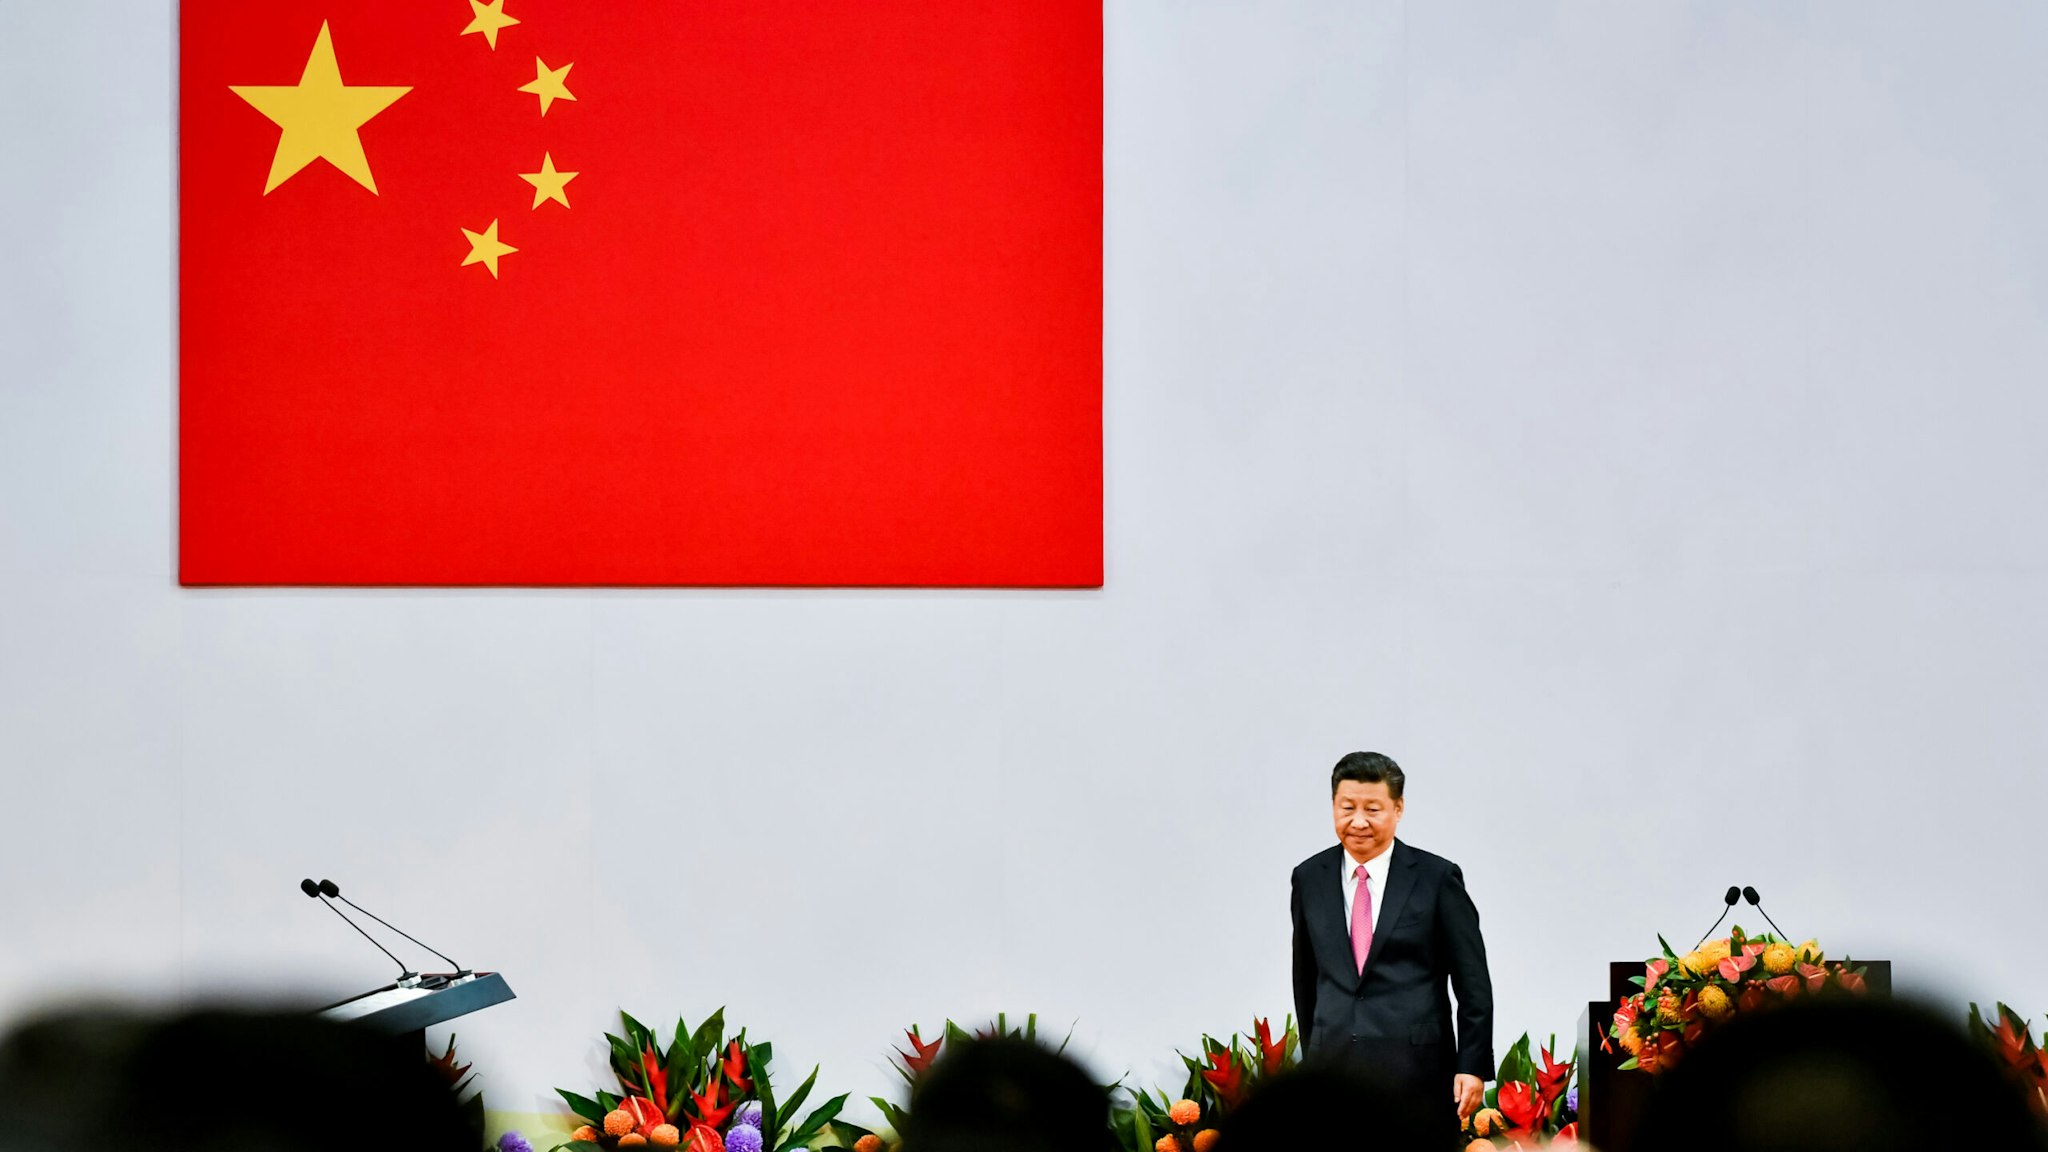 HONG KONG - JULY 01: Chinese President Xi Jinping attends an inauguration ceremony in Hong Kong, China on July 1, 2017 in Hong Kong, Hong Kong. Chinese President Xi Jinping made a visit to Hong Kong between June 29 and July 1 for the 20th anniversary of the city's handover to Chinese sovereignty.